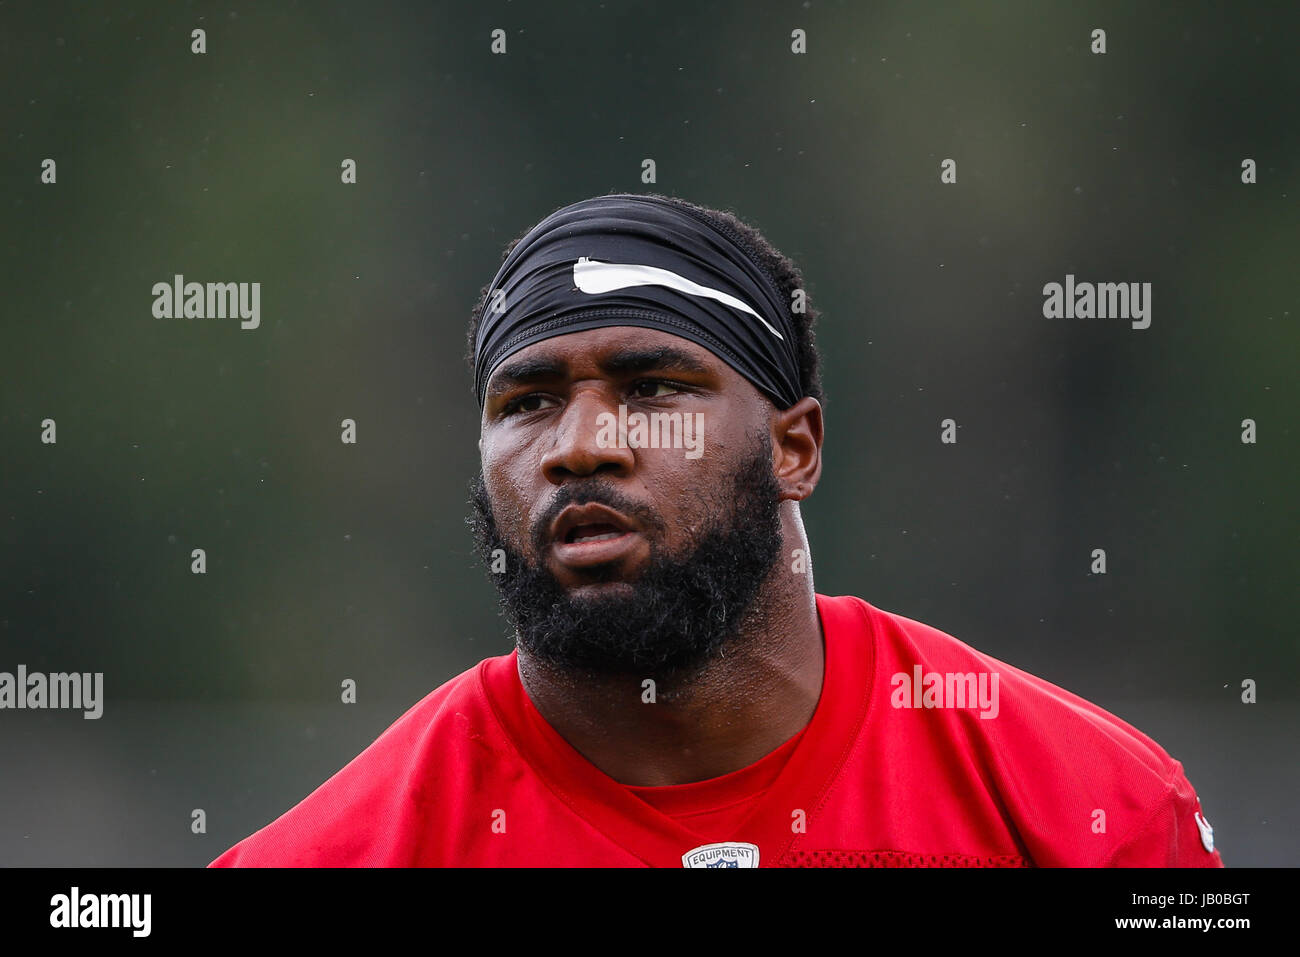 Florida, USA. 8th June, 2017. LOREN ELLIOTT | Times .Tampa Bay Buccaneers defensive end Robert Ayers (91) participates in a practice at One Buc Place, the team's training facility, in Tampa, Fla., on Thursday, June 8, 2017. Credit: Loren Elliott/Tampa Bay Times/ZUMA Wire/Alamy Live News Stock Photo